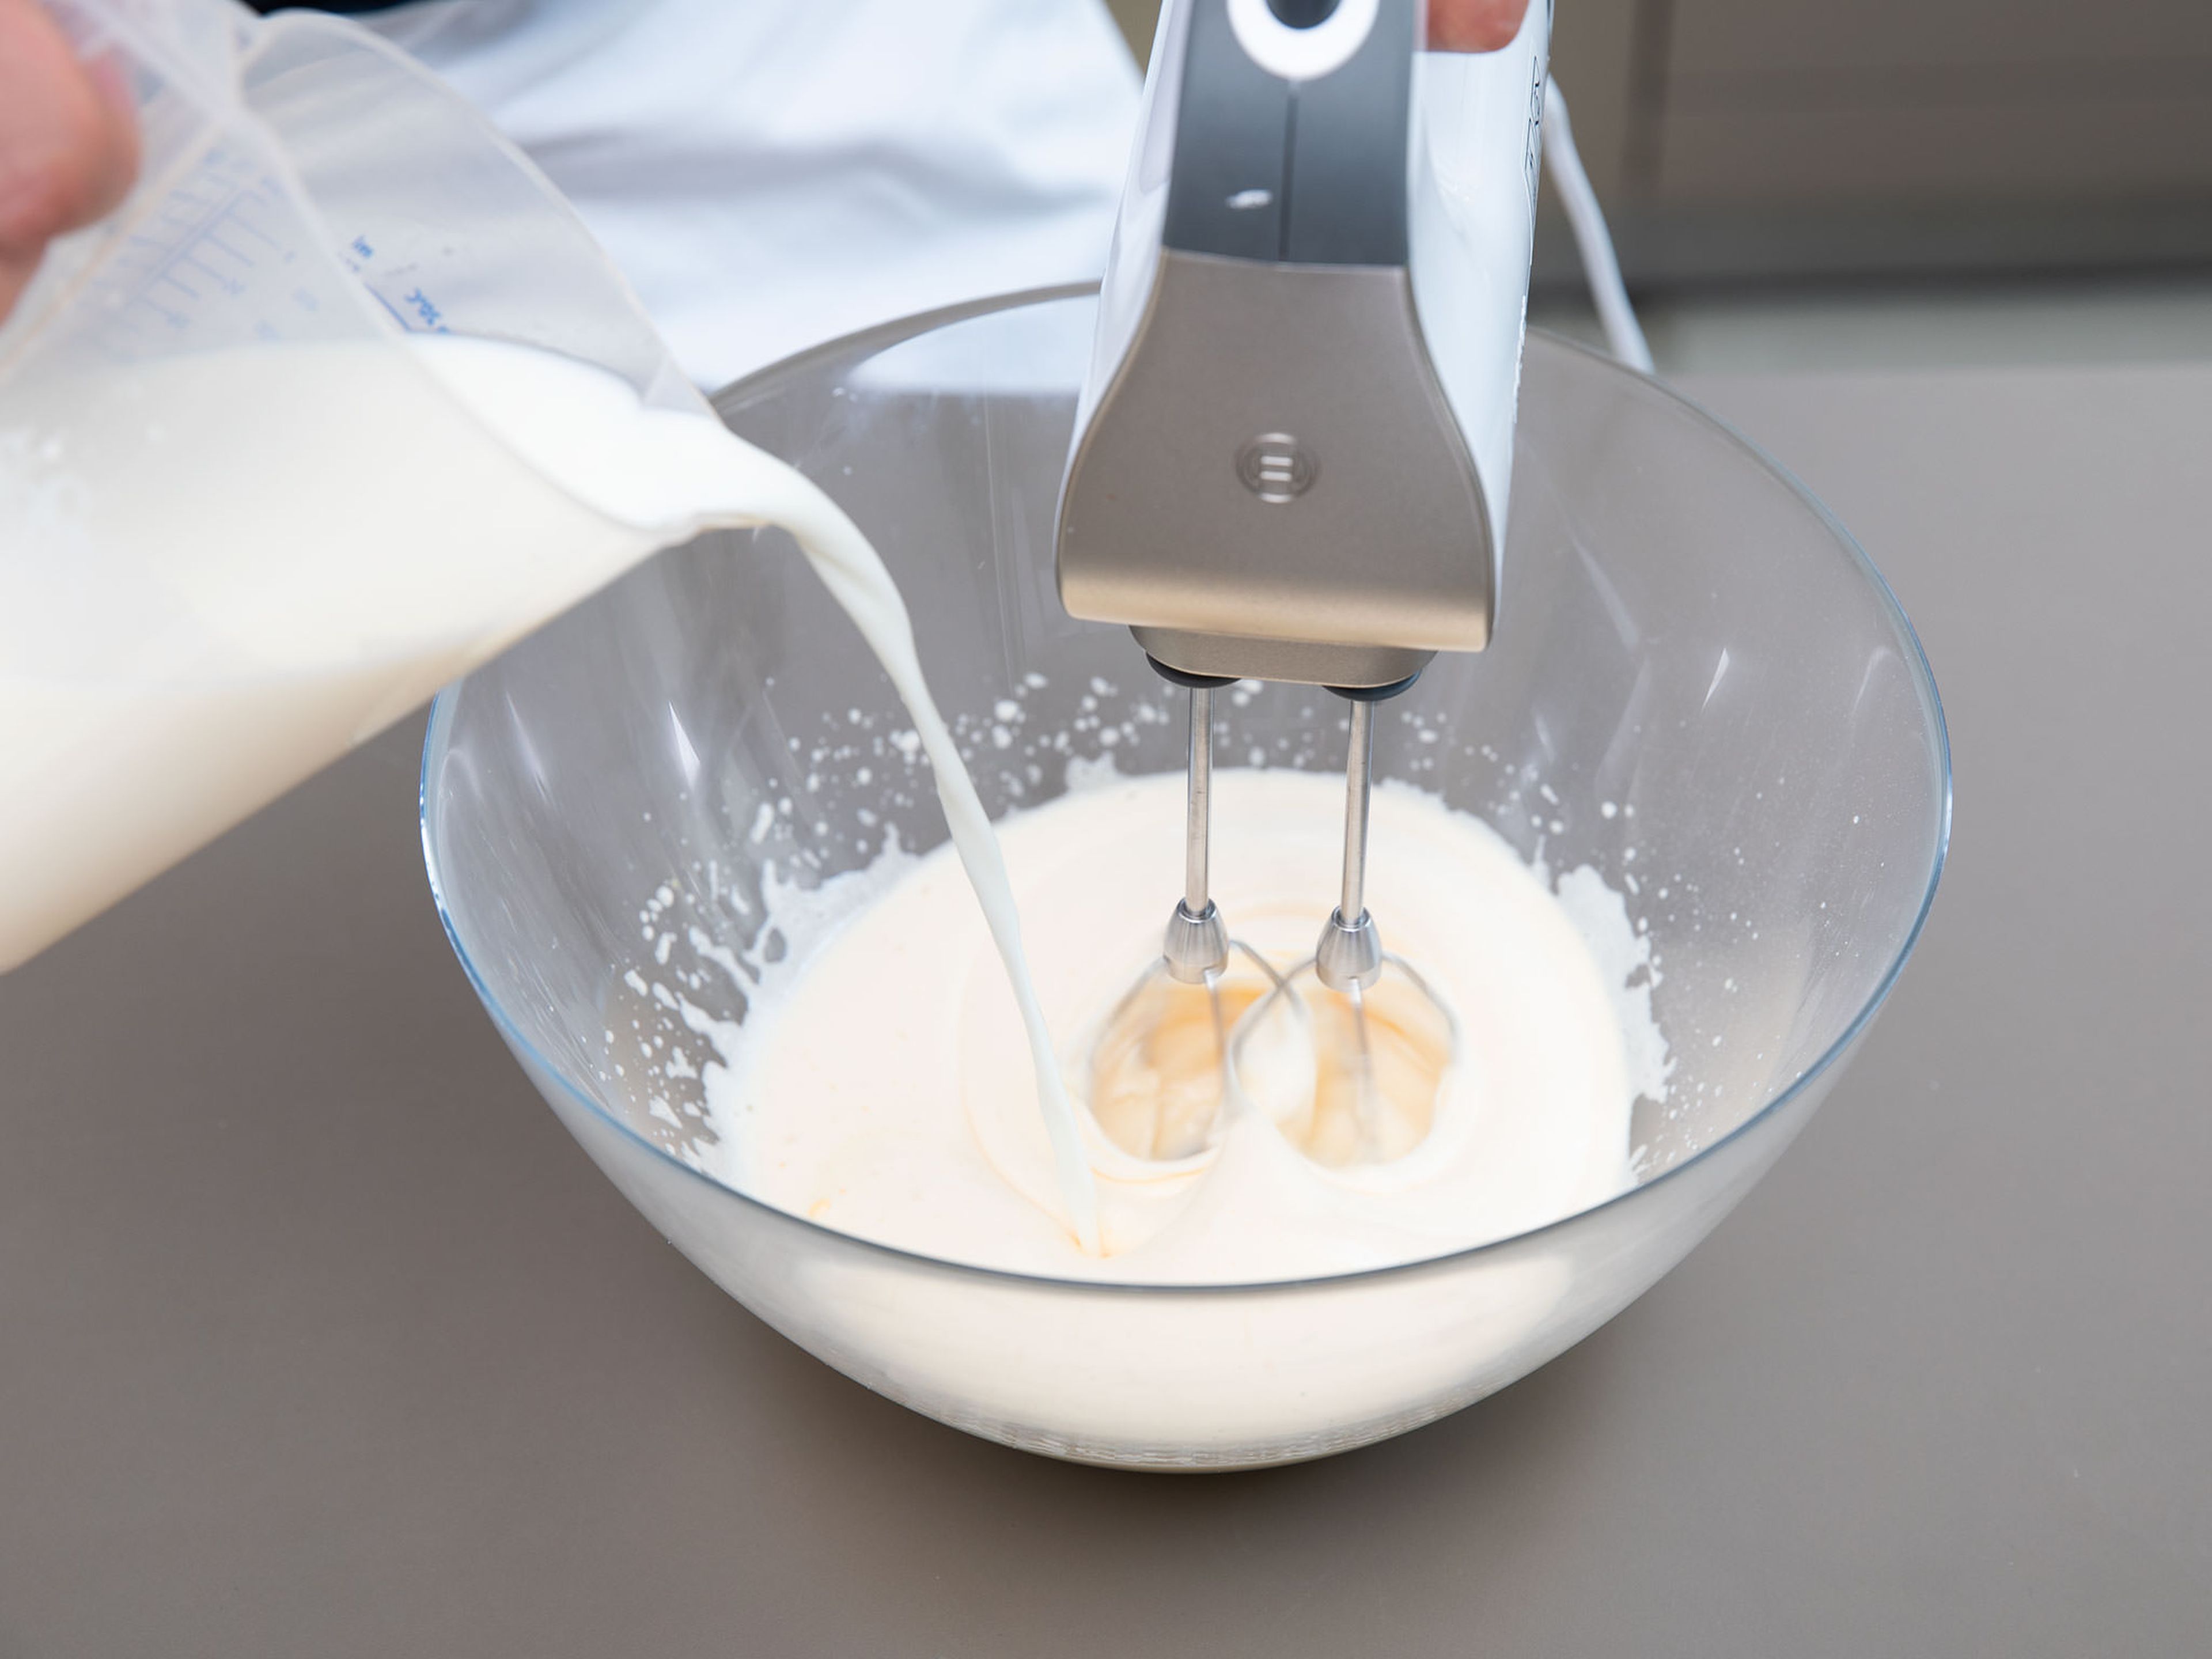 Add eggs to a bowl and mix until frothy. Add sugar and mix for approx. 1 min. Add milk and mix. Add flour and mix on highest level on hand mixer. Mix baking soda and vinegar, add to dough, and mix to combine. The dough should now be thick and smooth in consistency.